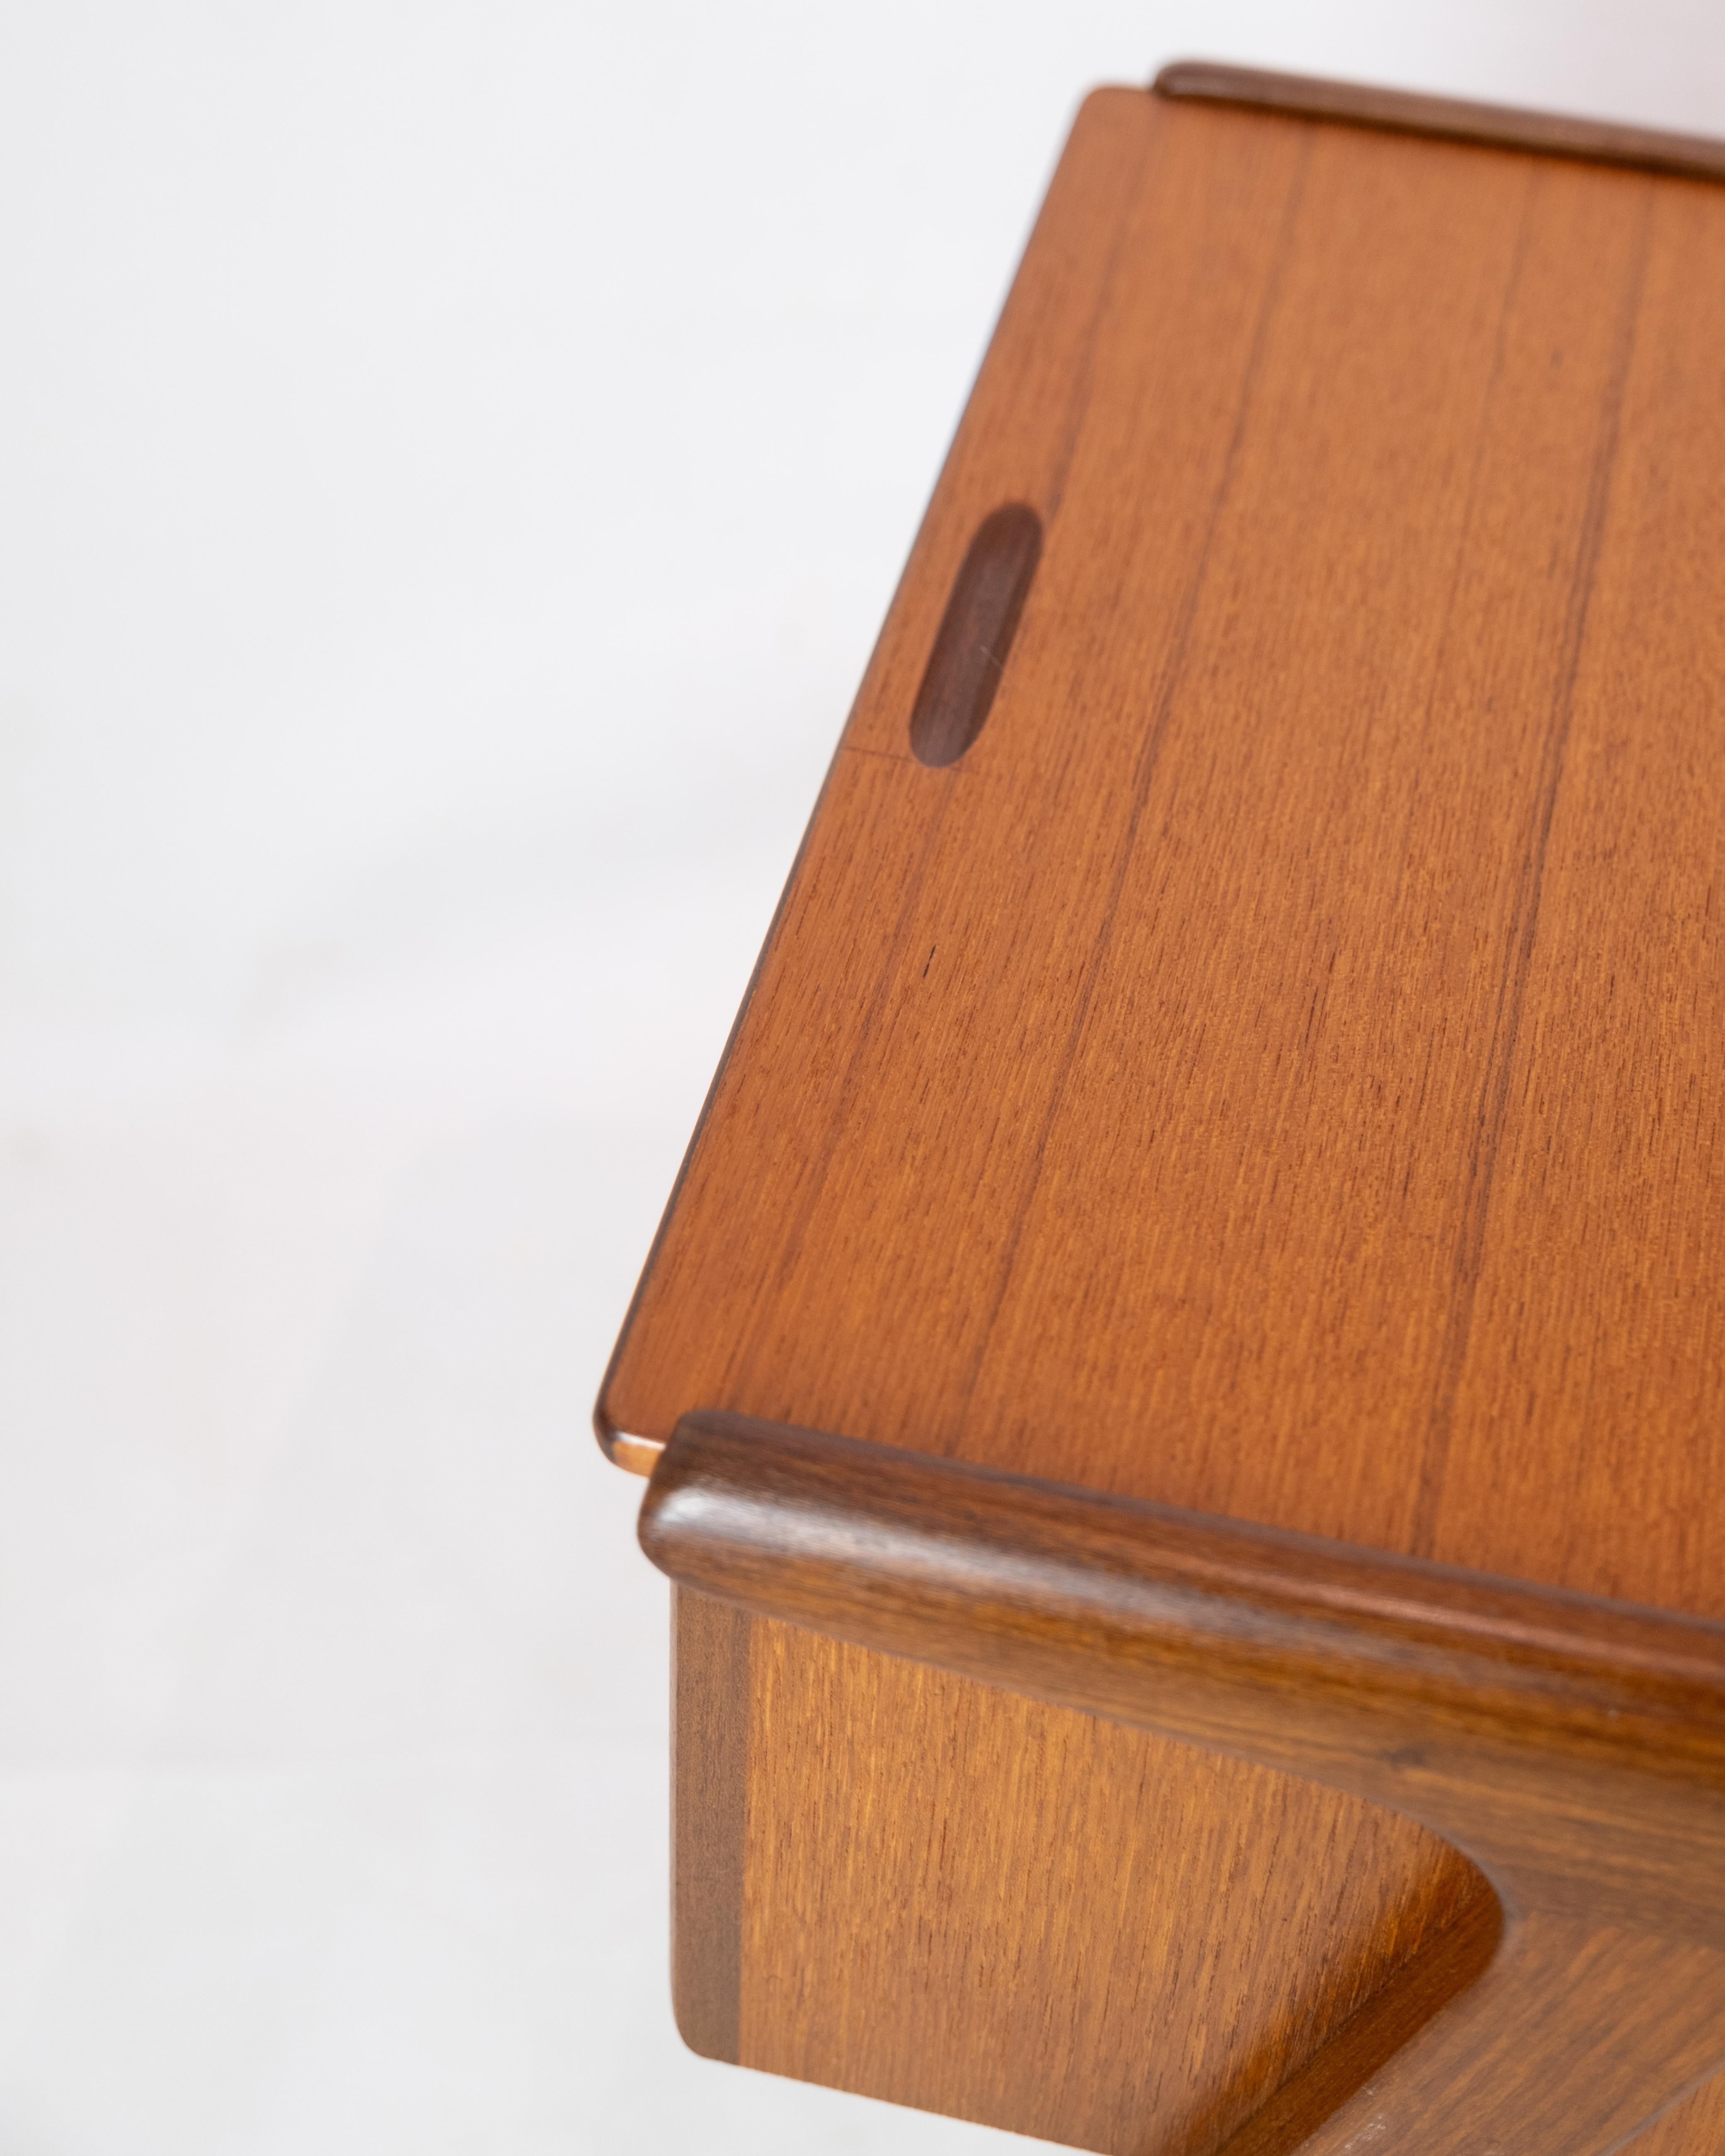 A teak sewing table with drawer from around the 1960s is a beautiful example of Danish design from the popular mid-century modern period.

The teak tree is known for its warm color and natural beauty, which makes it a popular material in Danish